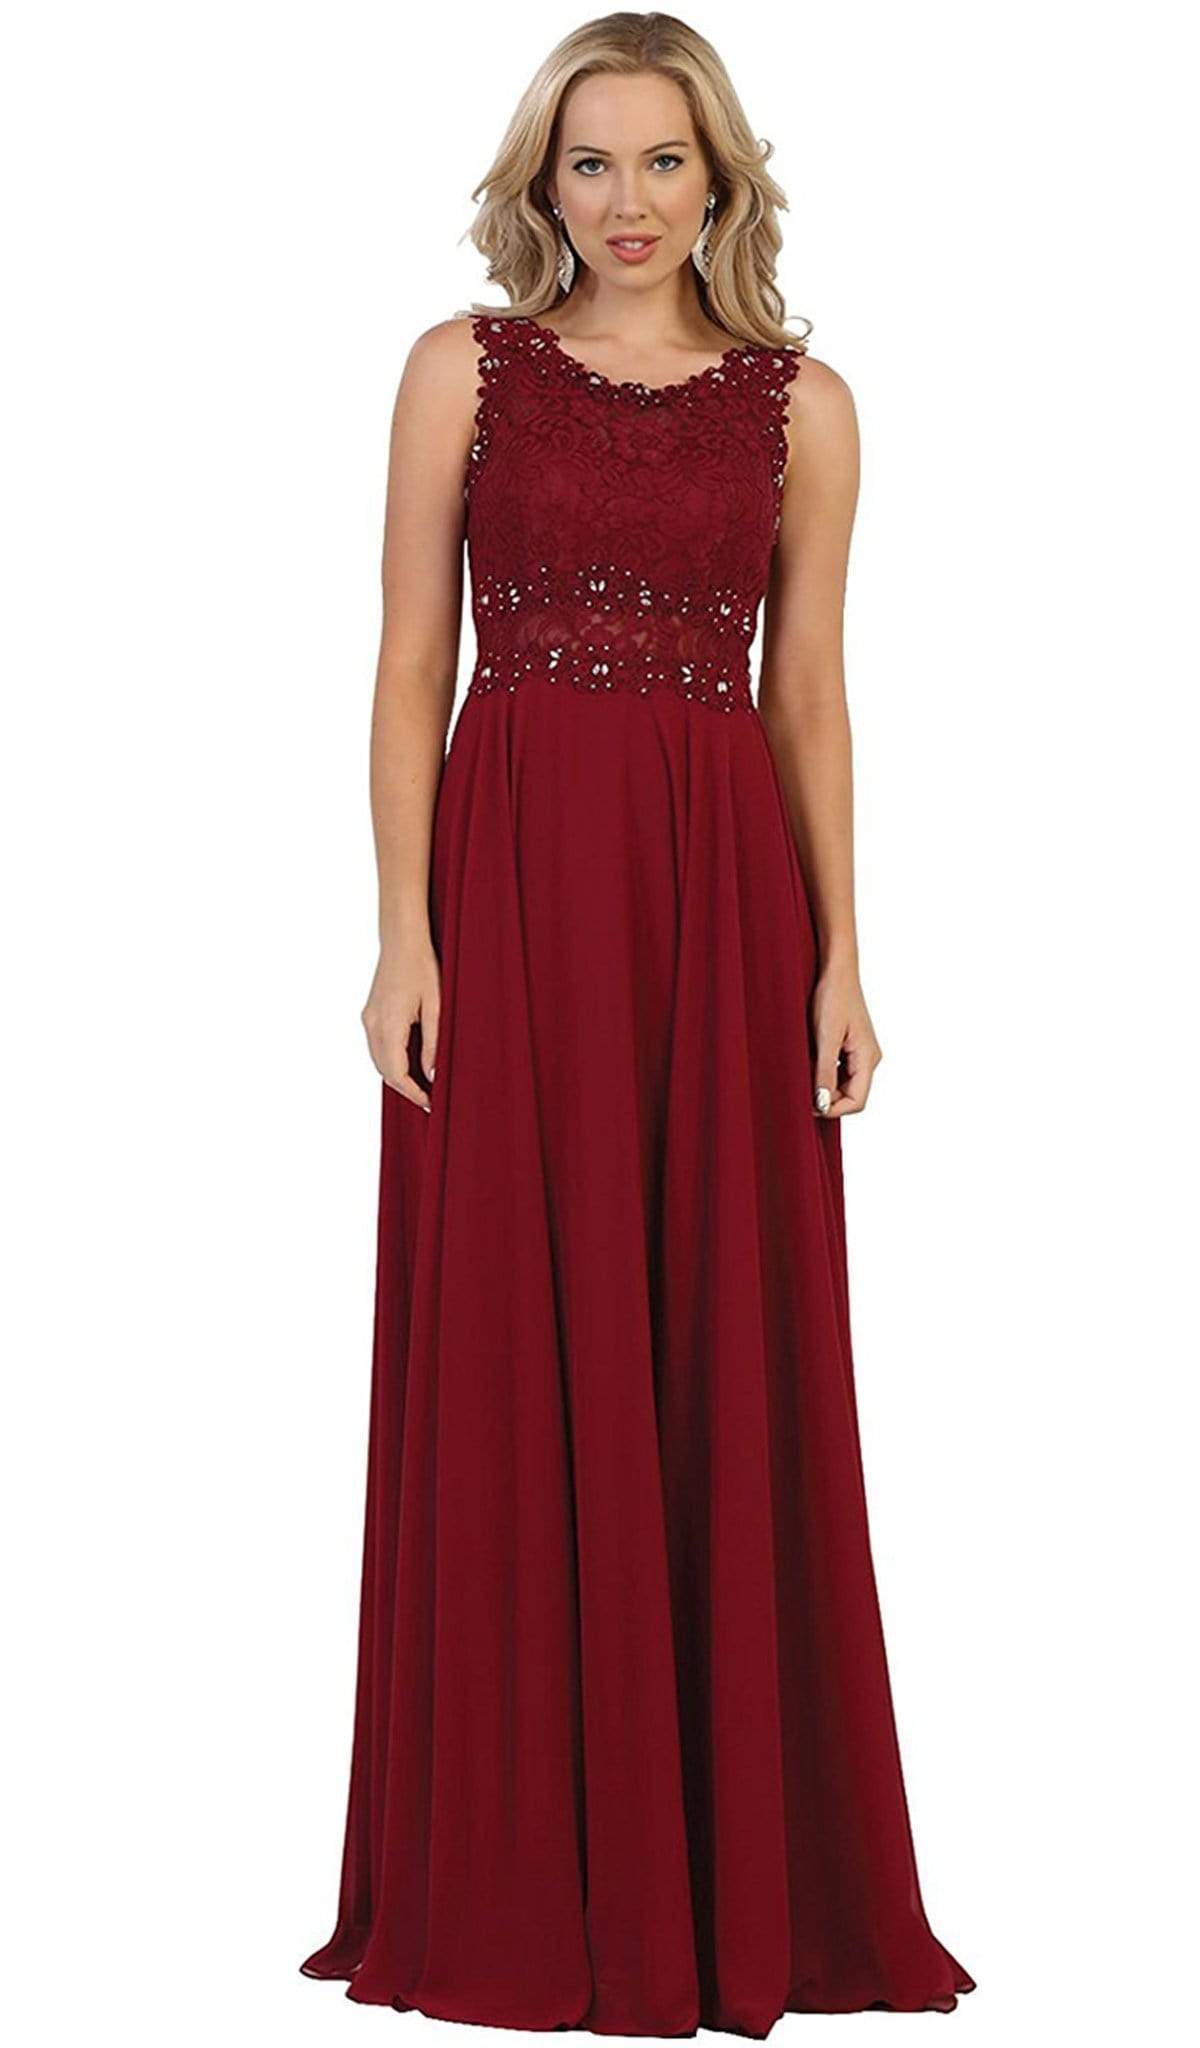 May Queen - MQ1539 Beaded Lace Scoop Prom Dress Bridesmaid Dresses 4 / Burgundy